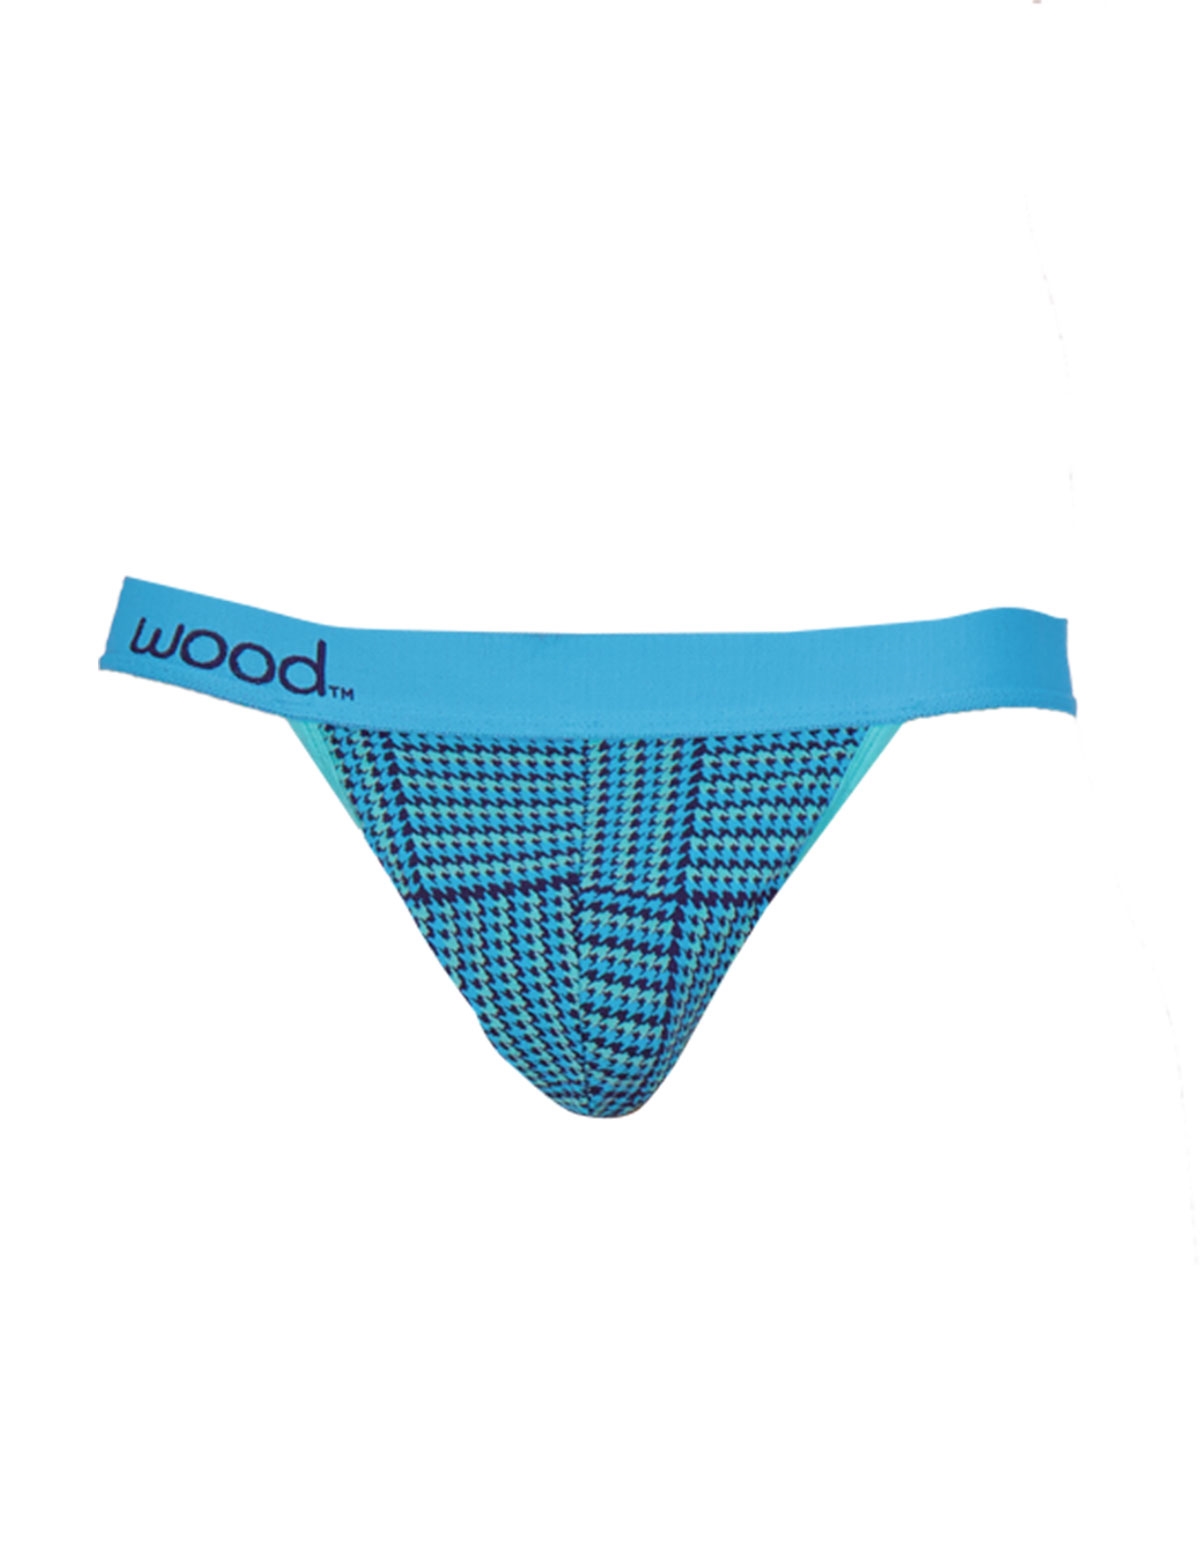 alternate image for Wood Thong - Blue Hound Weave